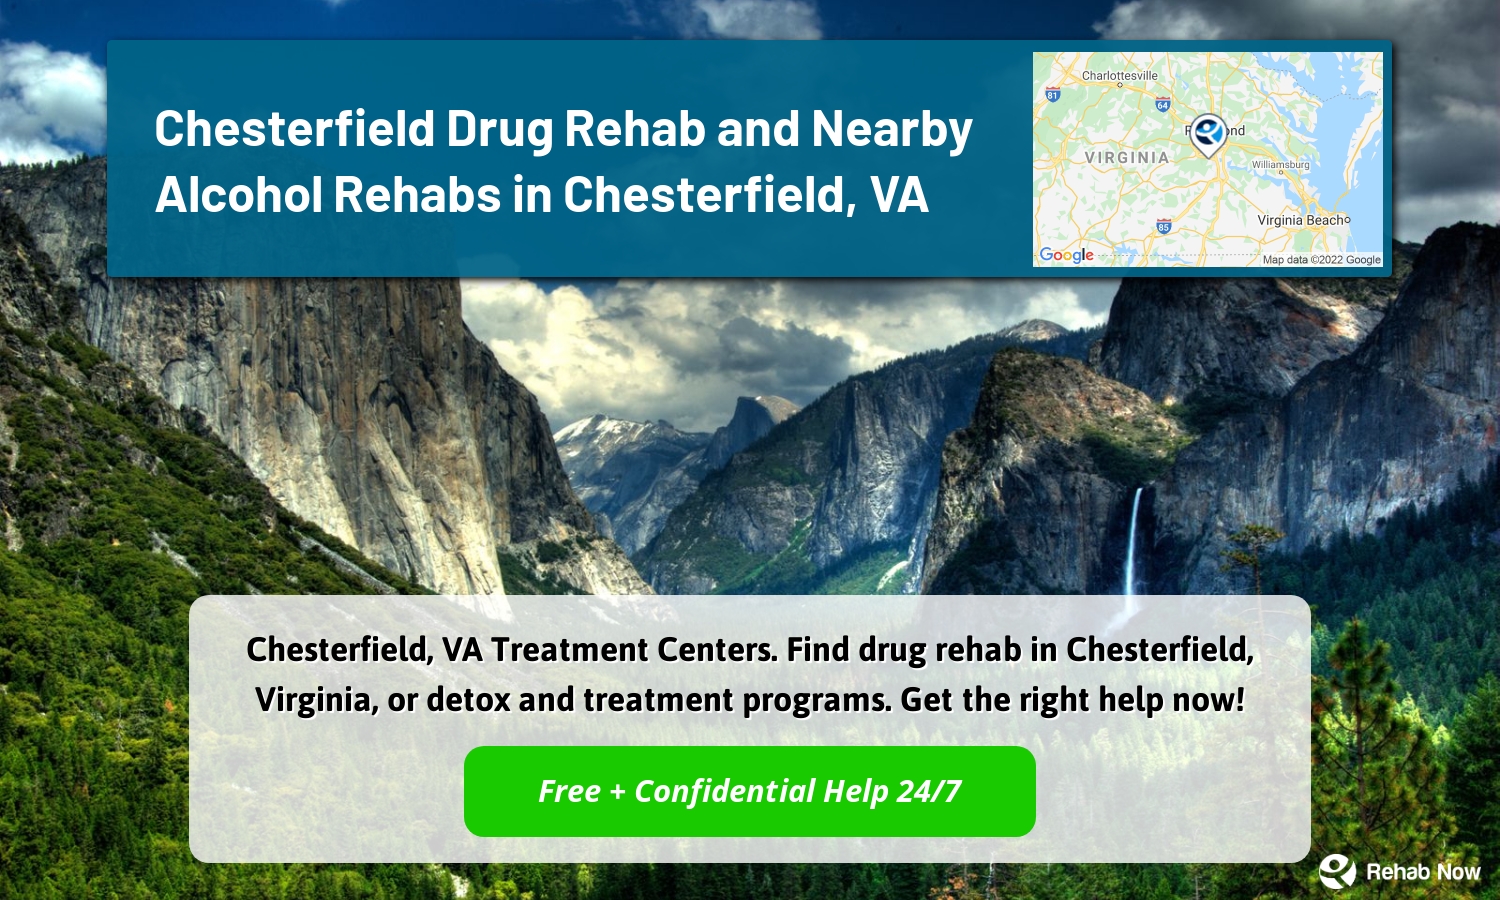 Chesterfield, VA Treatment Centers. Find drug rehab in Chesterfield, Virginia, or detox and treatment programs. Get the right help now!